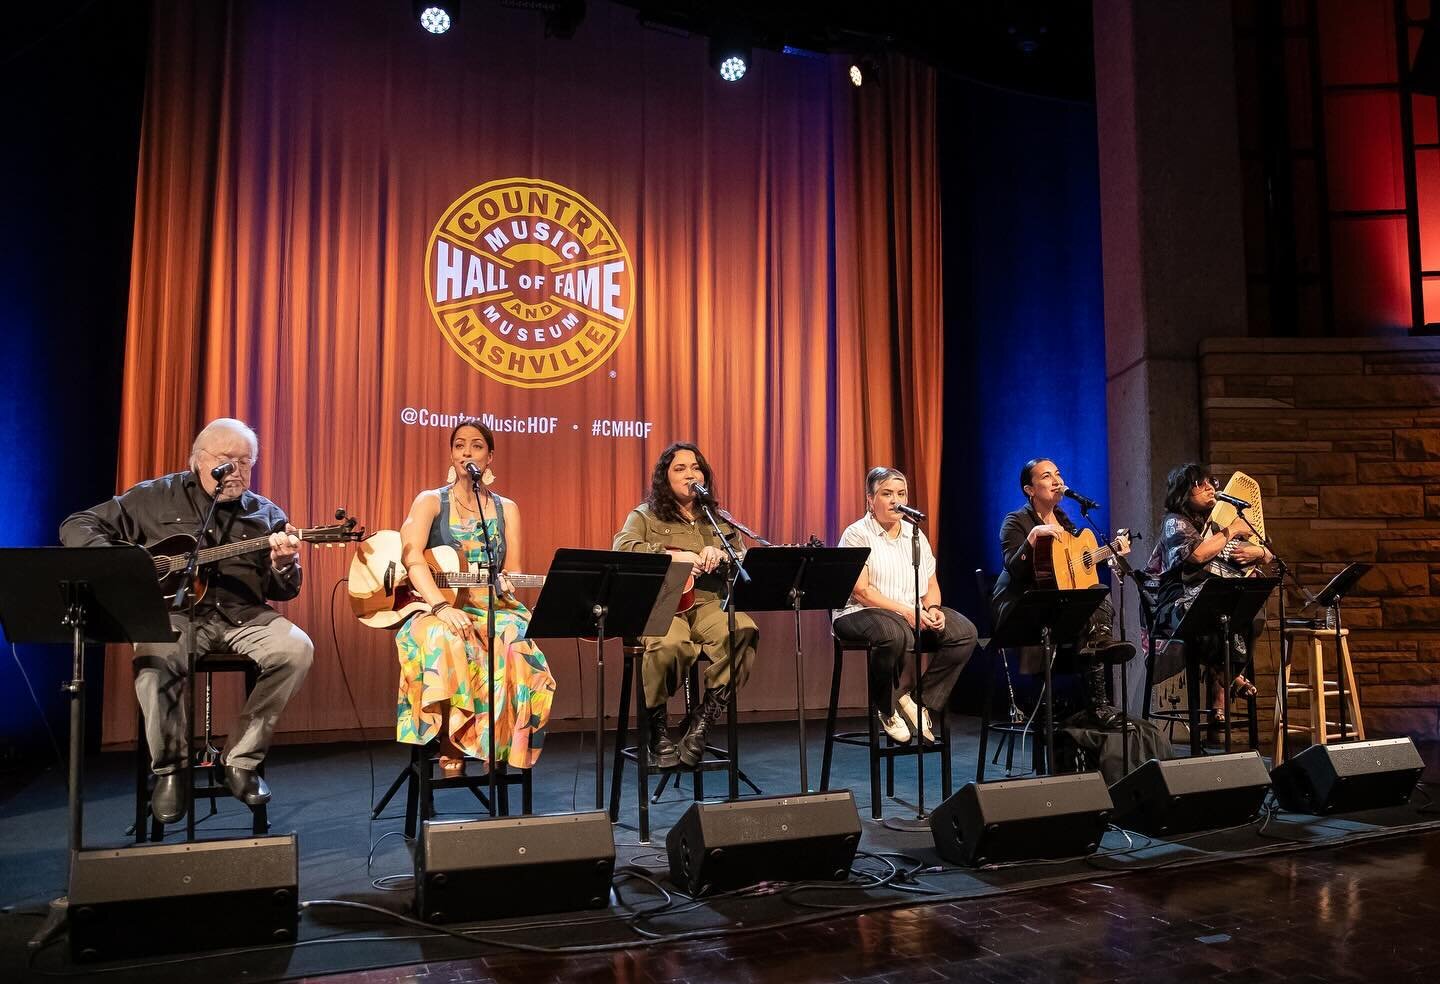 @patalgerofficial ha sido nuestra oraci&oacute;n respondida 🫶🏼 so proud of our ELLA writers and the history making show they did with an all Latina writers round and showcase, at the Ford Theater in the @countrymusichof. We&rsquo;re grateful to our